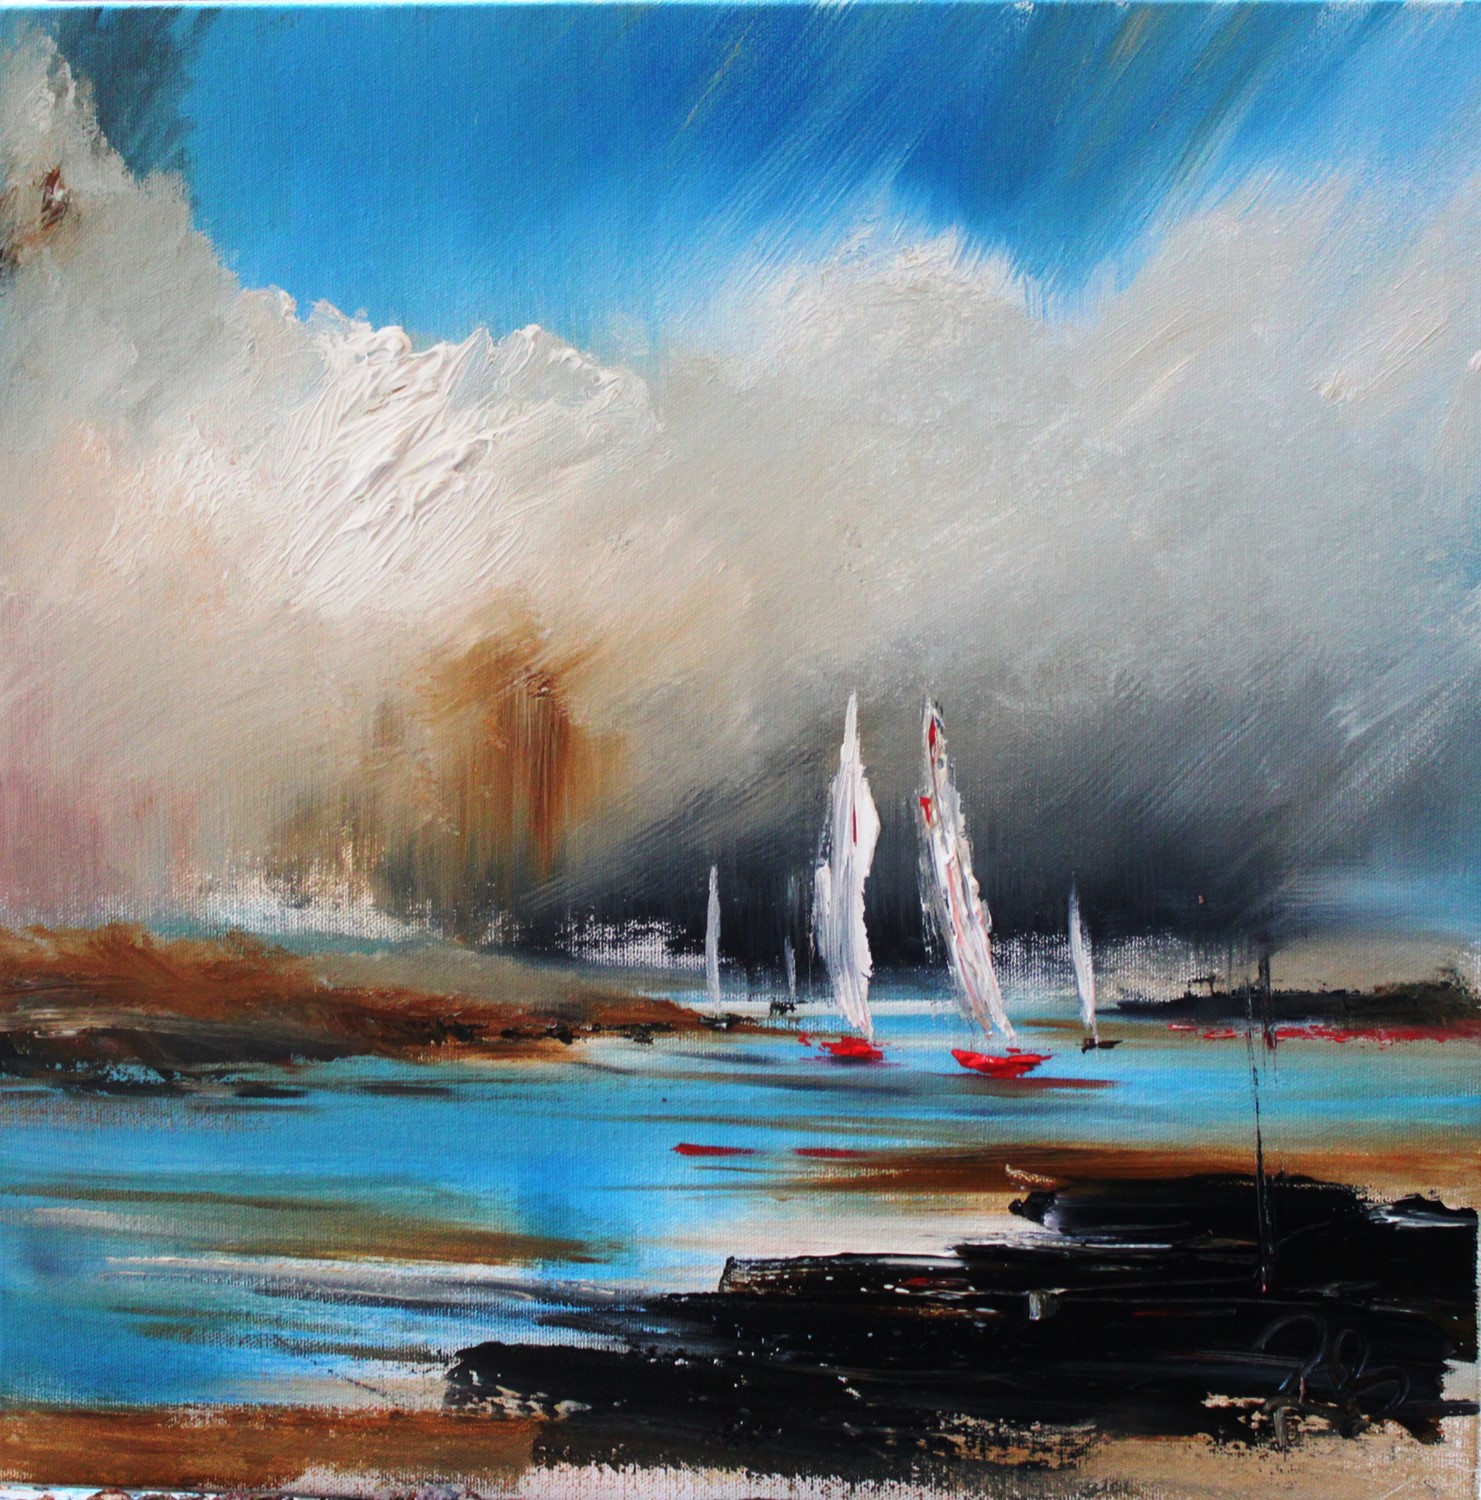 'Blustery Sails ' by artist Rosanne Barr